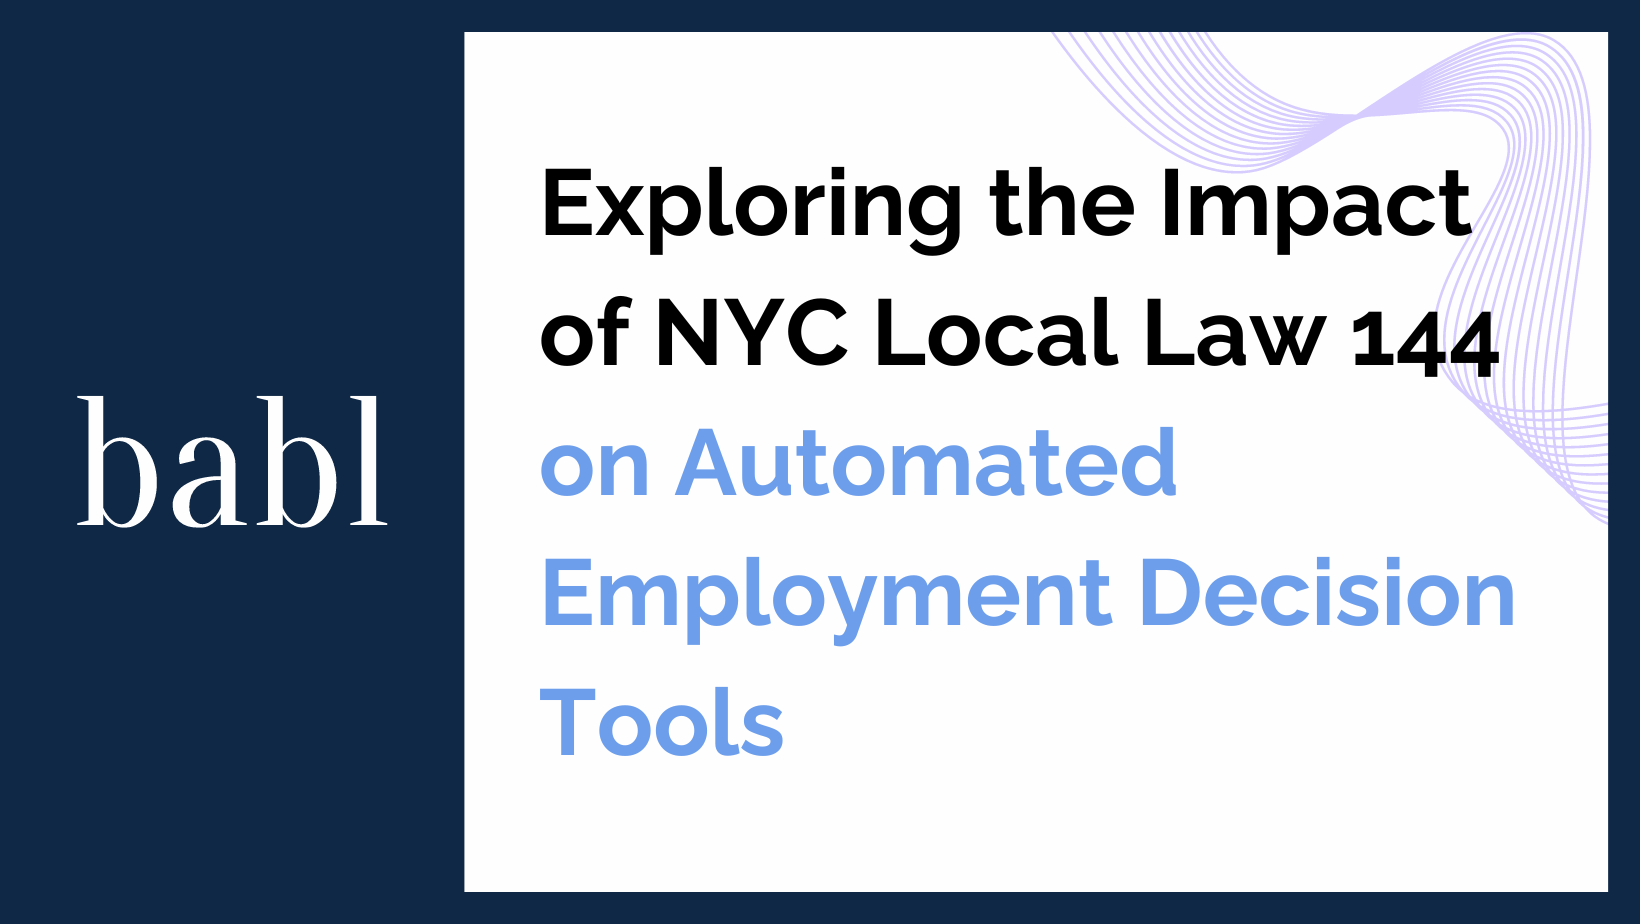 Exploring the Impact of NYC Local Law 144 on Automated Employment Decision Tools